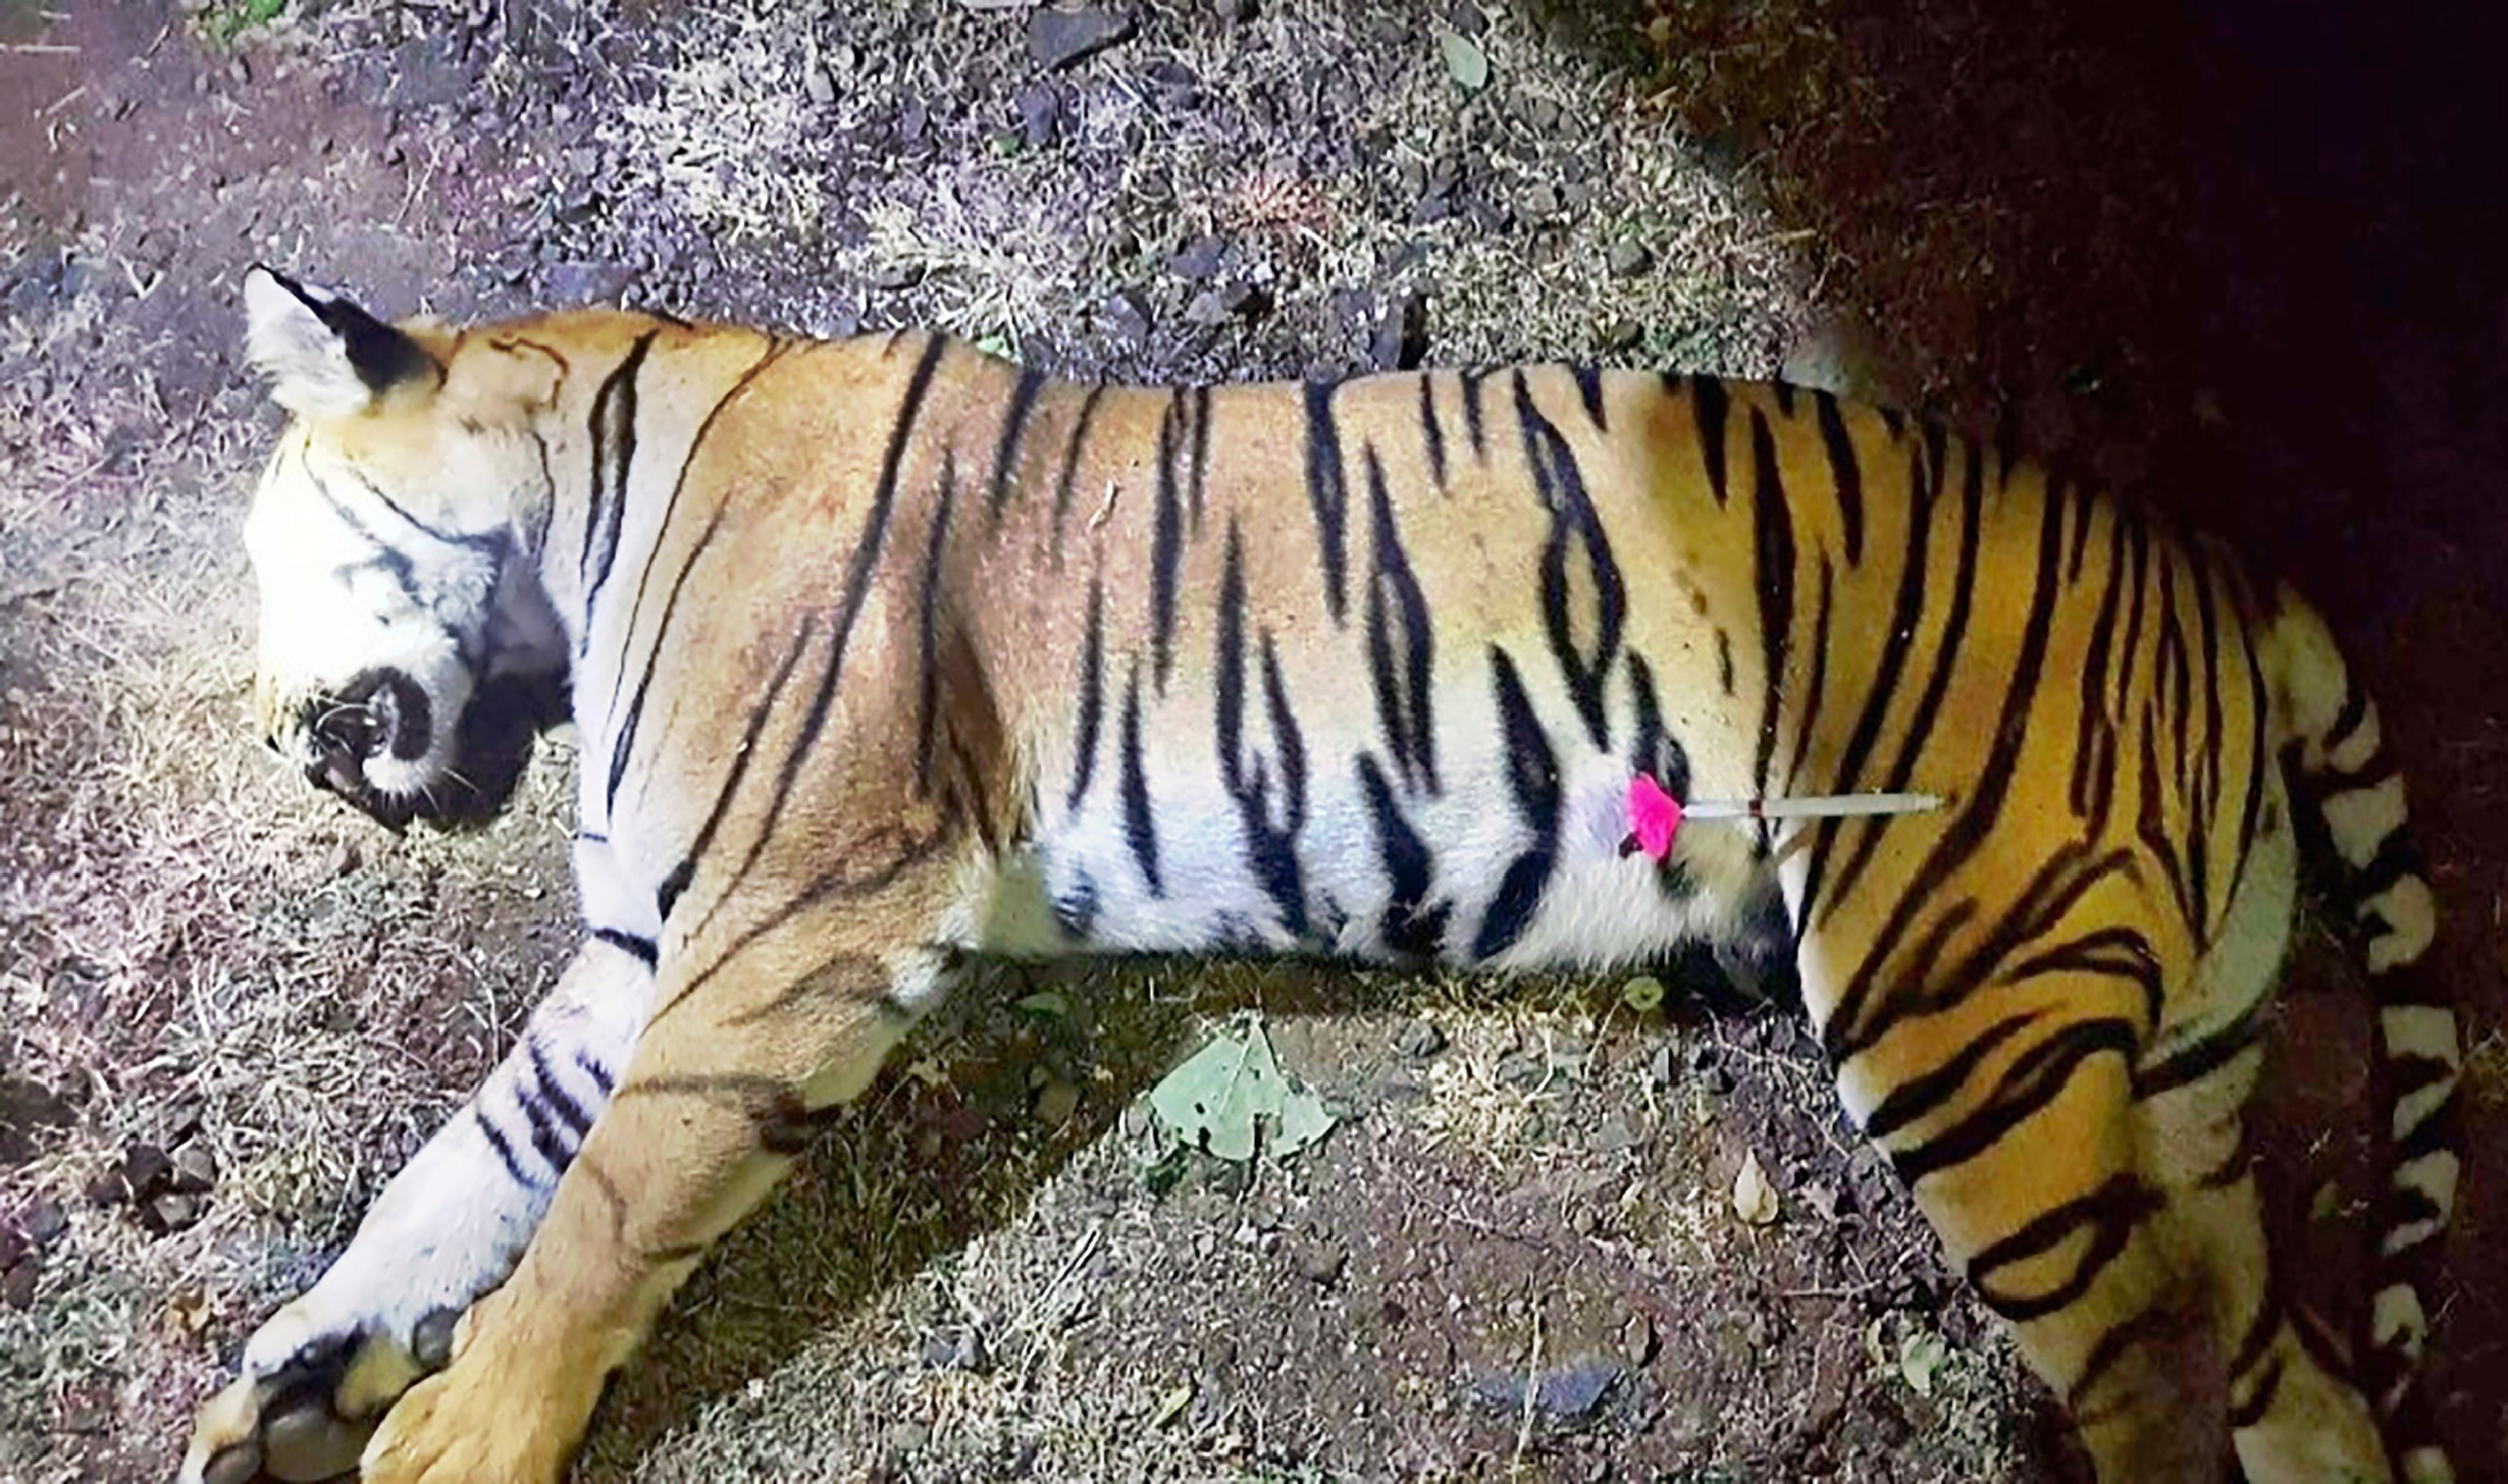 Man-eating tiger shot dead in India after massive hunt, but details of  killing disputed | South China Morning Post